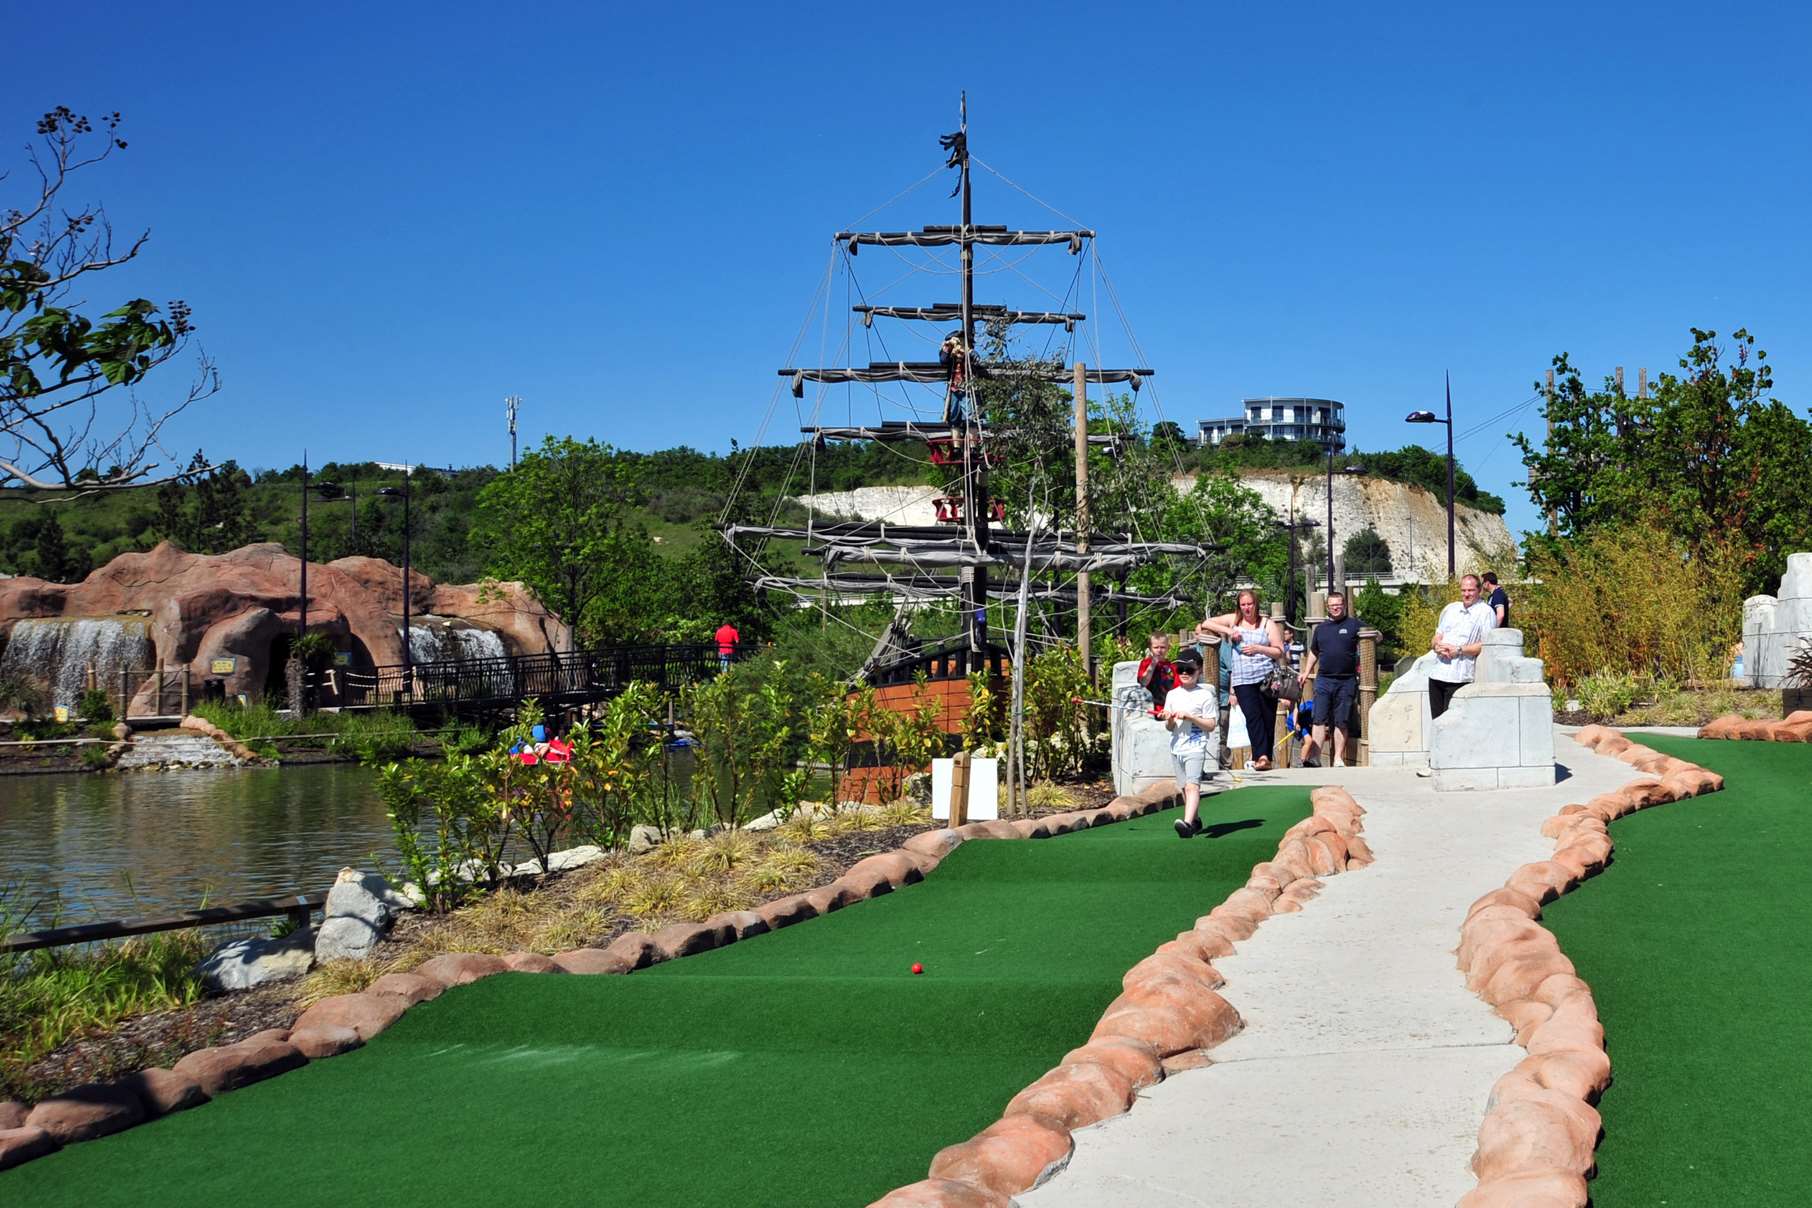 Have a go at the pirate crazy golf at Bluewater